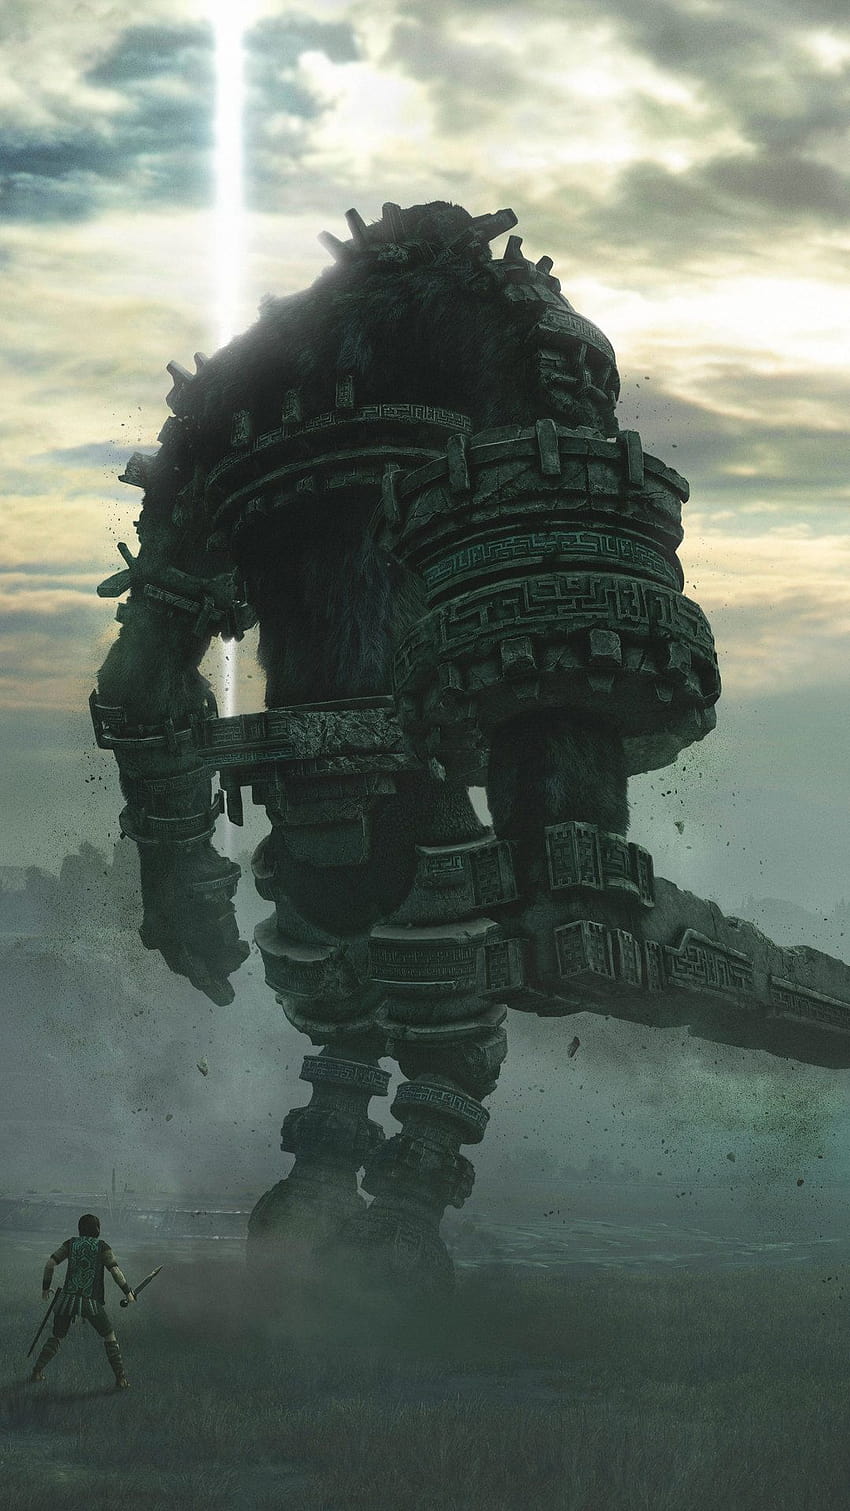 PlayStation on X: The votes are in, and Colossus 15 is your top pick for  the Shadow of the Colossus wallpaper treatment. Click to download hi-res  images for desktop and mobile